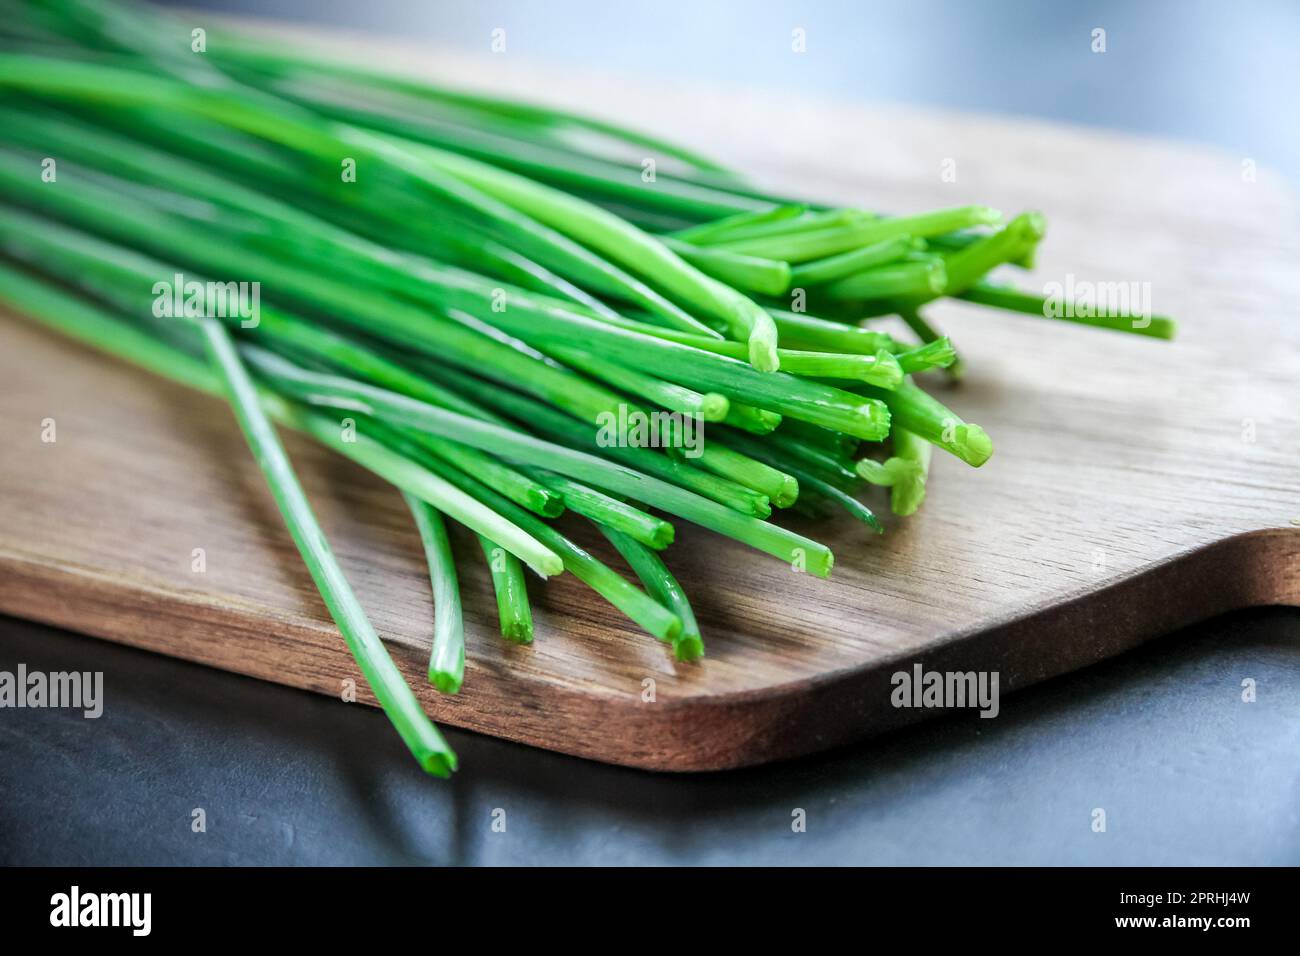 Bunch of chives on a wooden cutting board Stock Photo